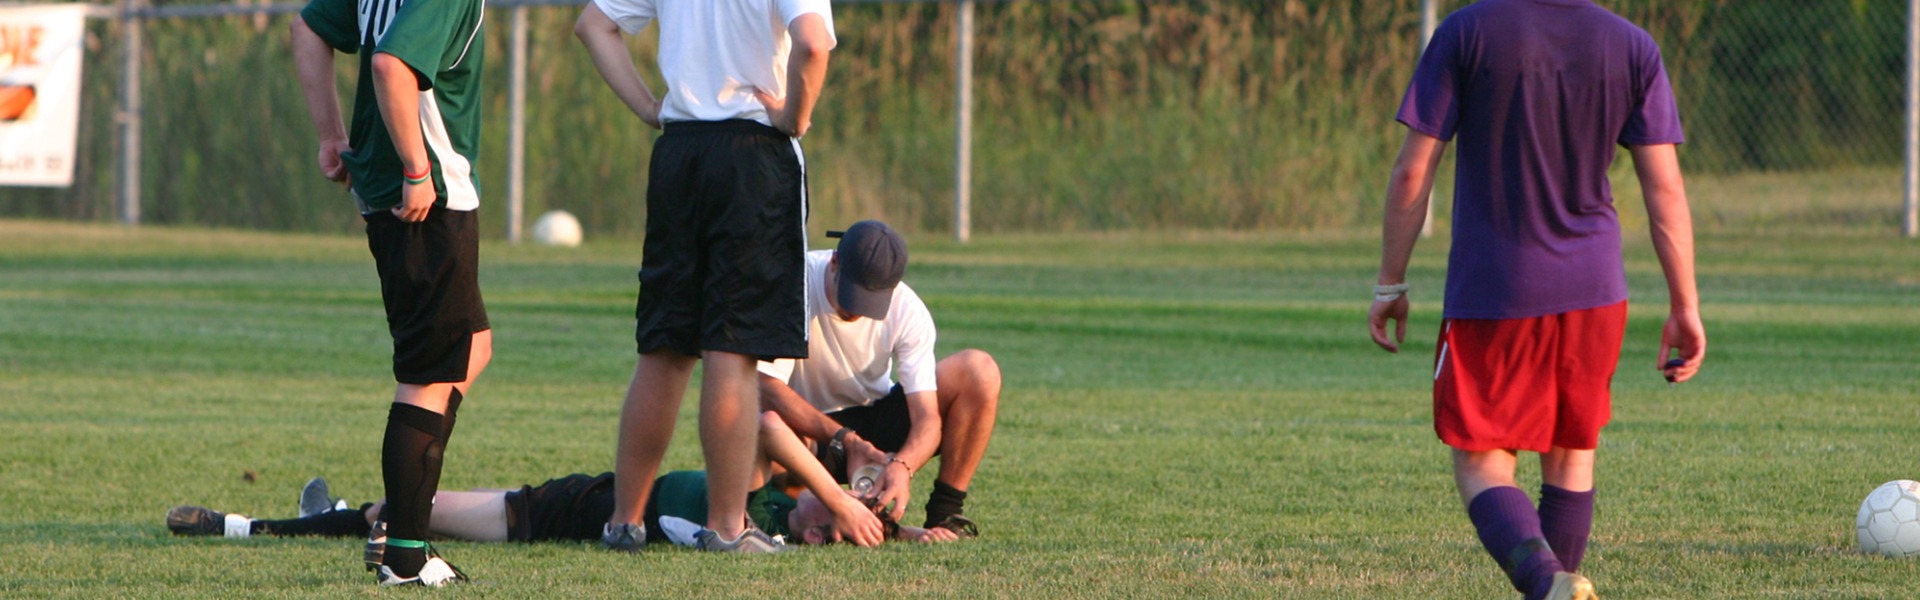 Signs of a Concussion in Young Athletes | Mercy Health Blog